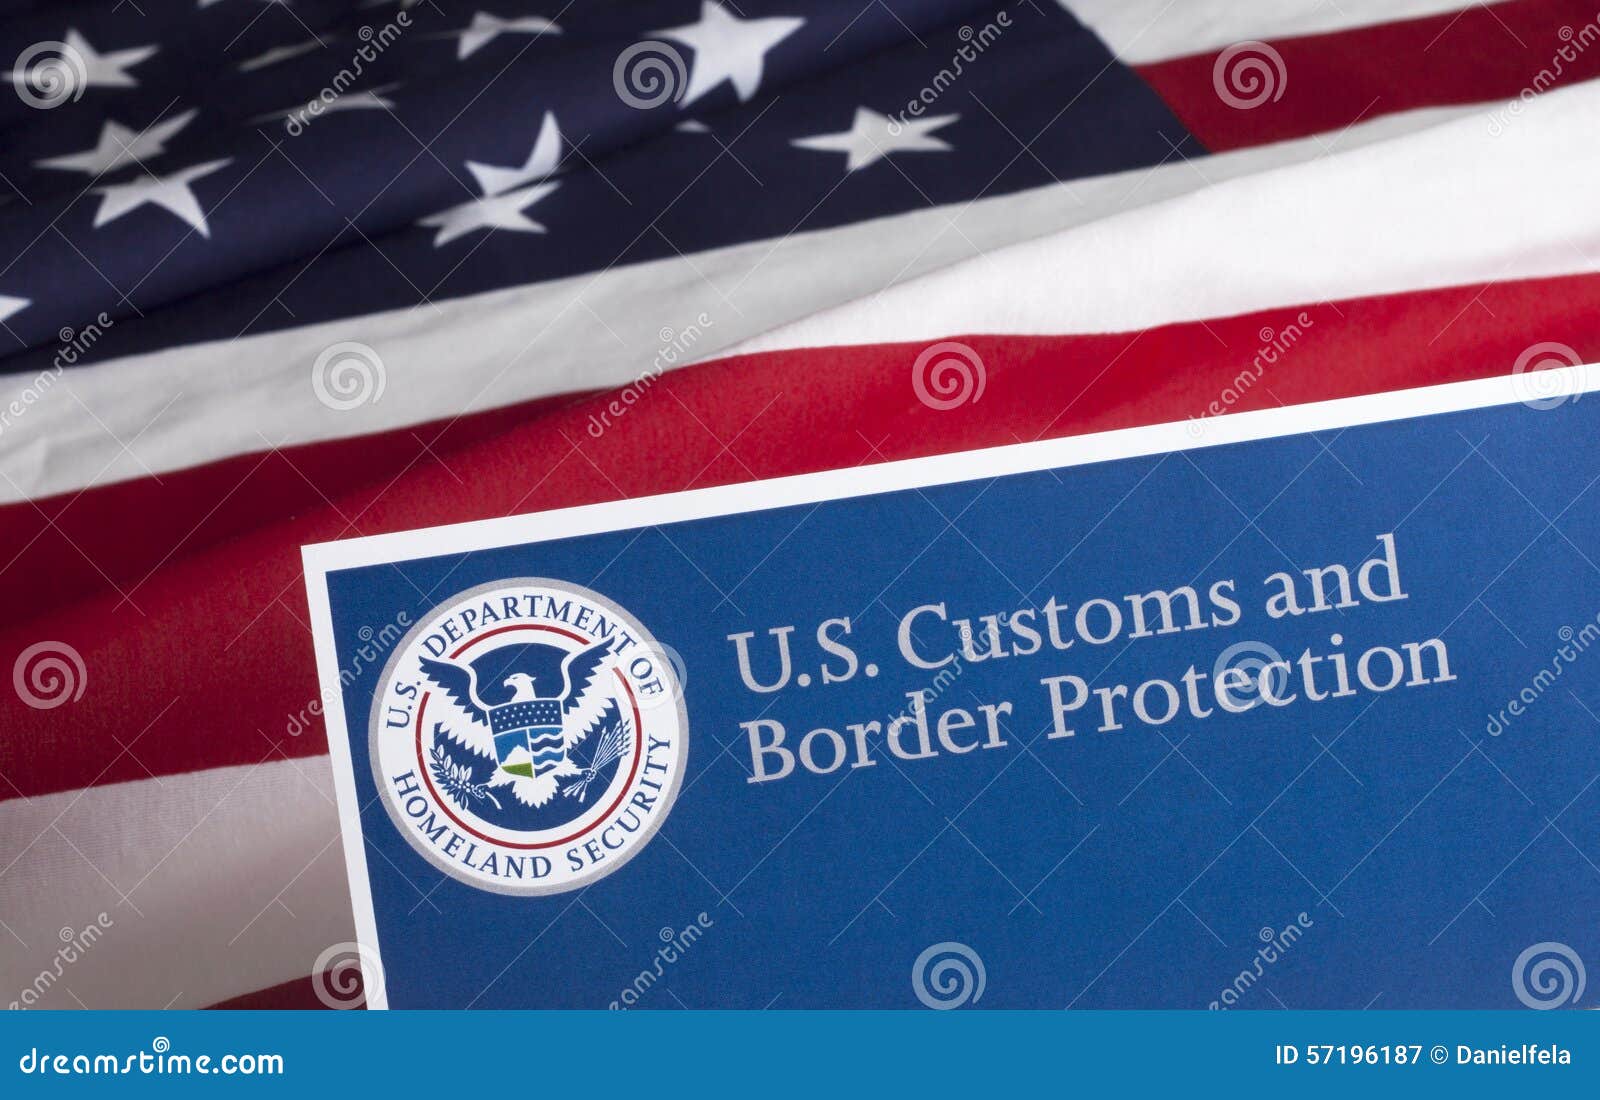 us customs and border protection